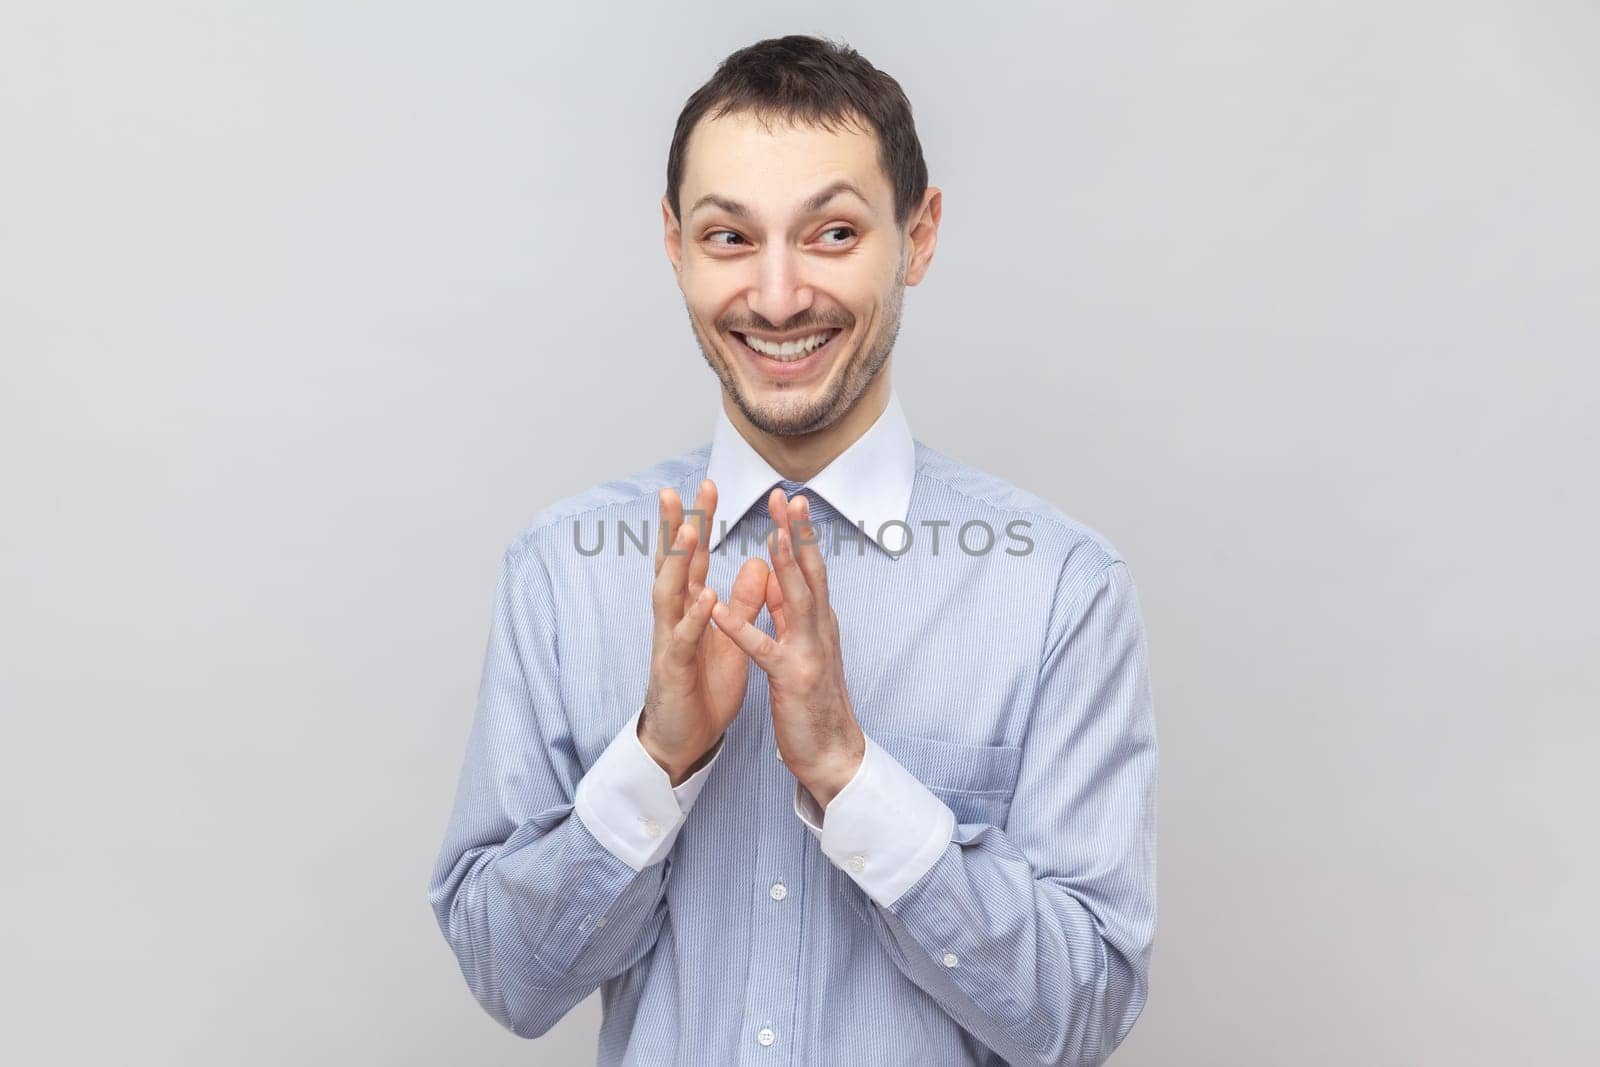 Portrait of cunning sly young adult man standing looking away with toothy smile, having devil plans, planning prank, wearing light blue shirt. Indoor studio shot isolated on gray background.